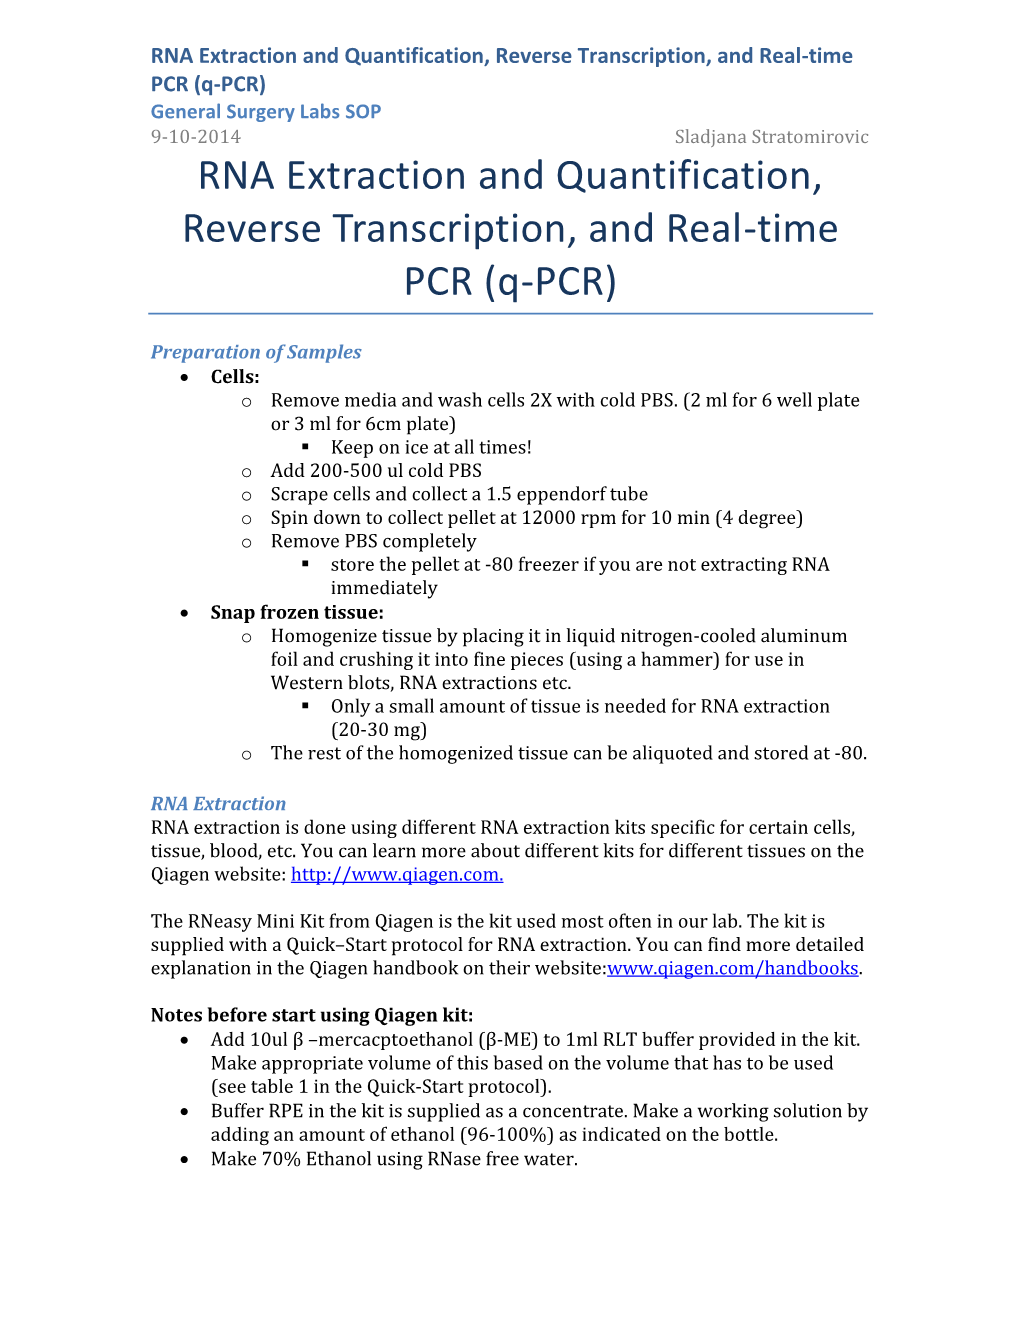 RNA Extraction and Quantification, Reverse Transcription, and Real